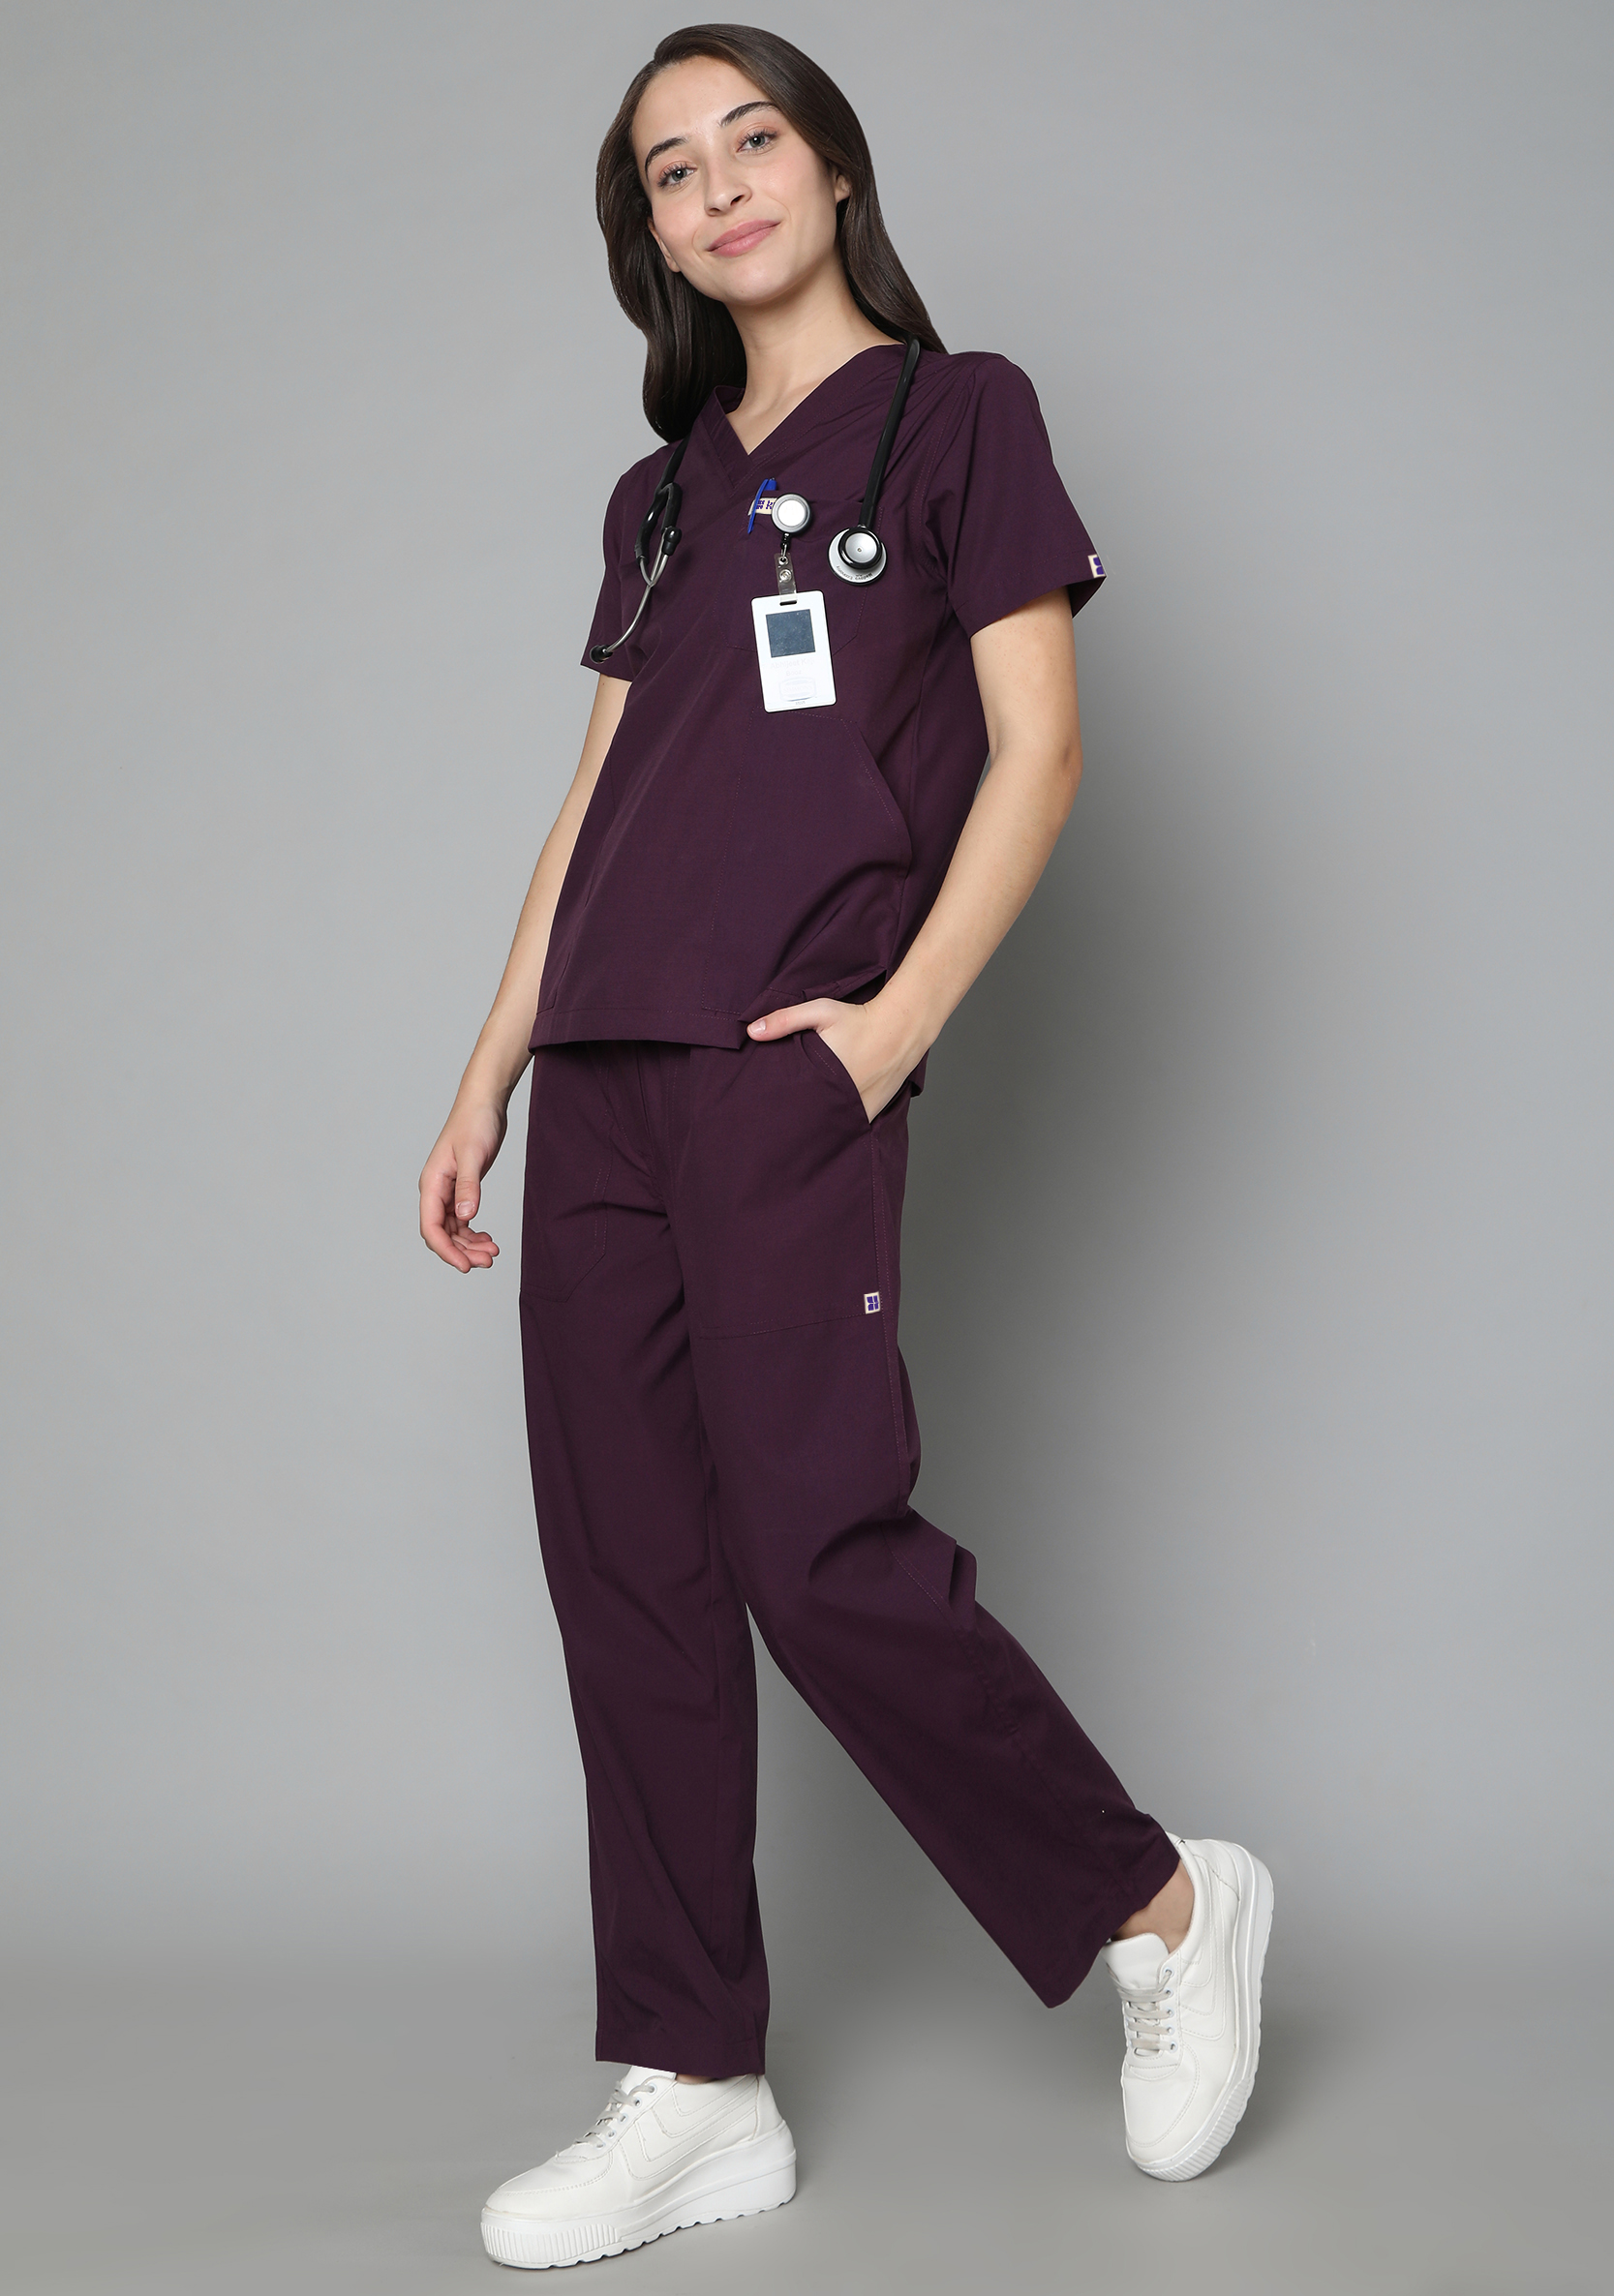 Red Surgical Scrubs Online, OT Dress for Doctors With Name